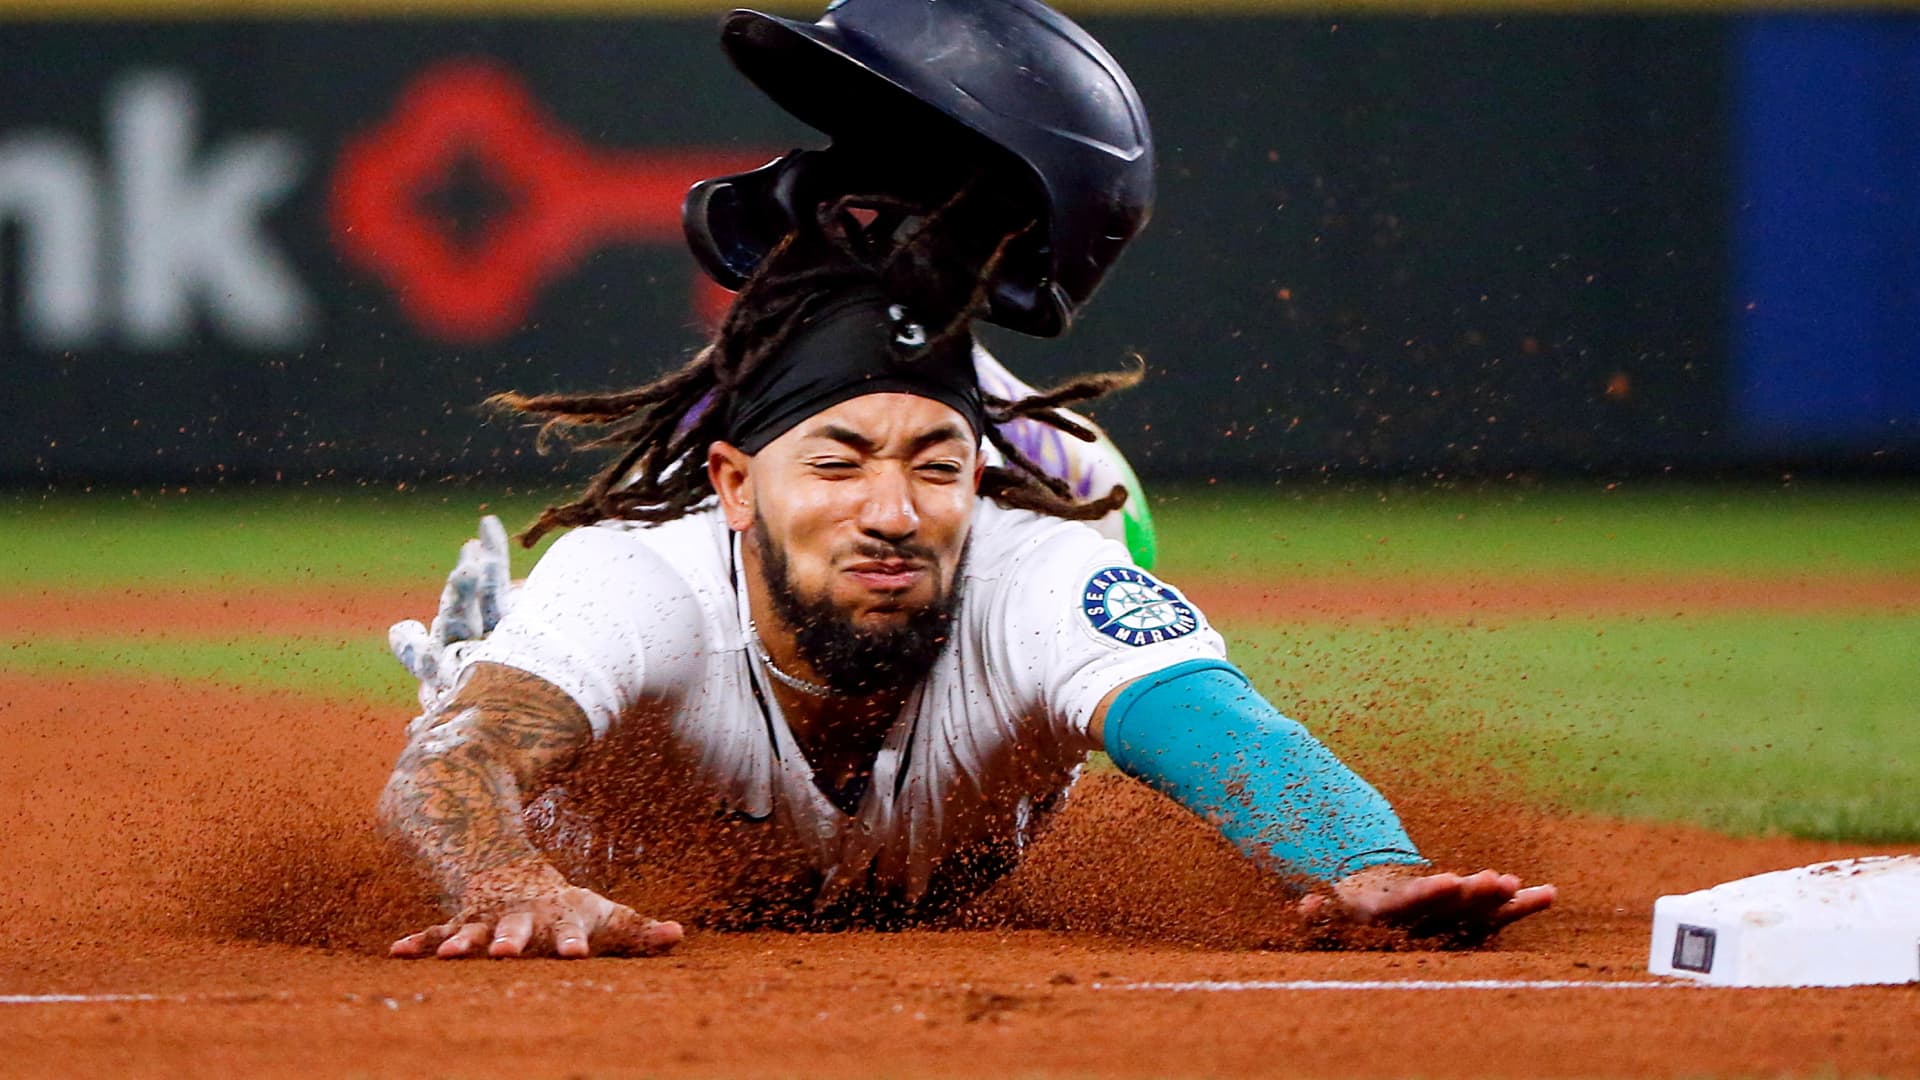 Seattle Mariners shortstop J.P. Crawford (3) slides into third to advance on a sacrifice fly against the Oakland Athletics during the third inning at T-Mobile Park, Sept. 28, 2021..